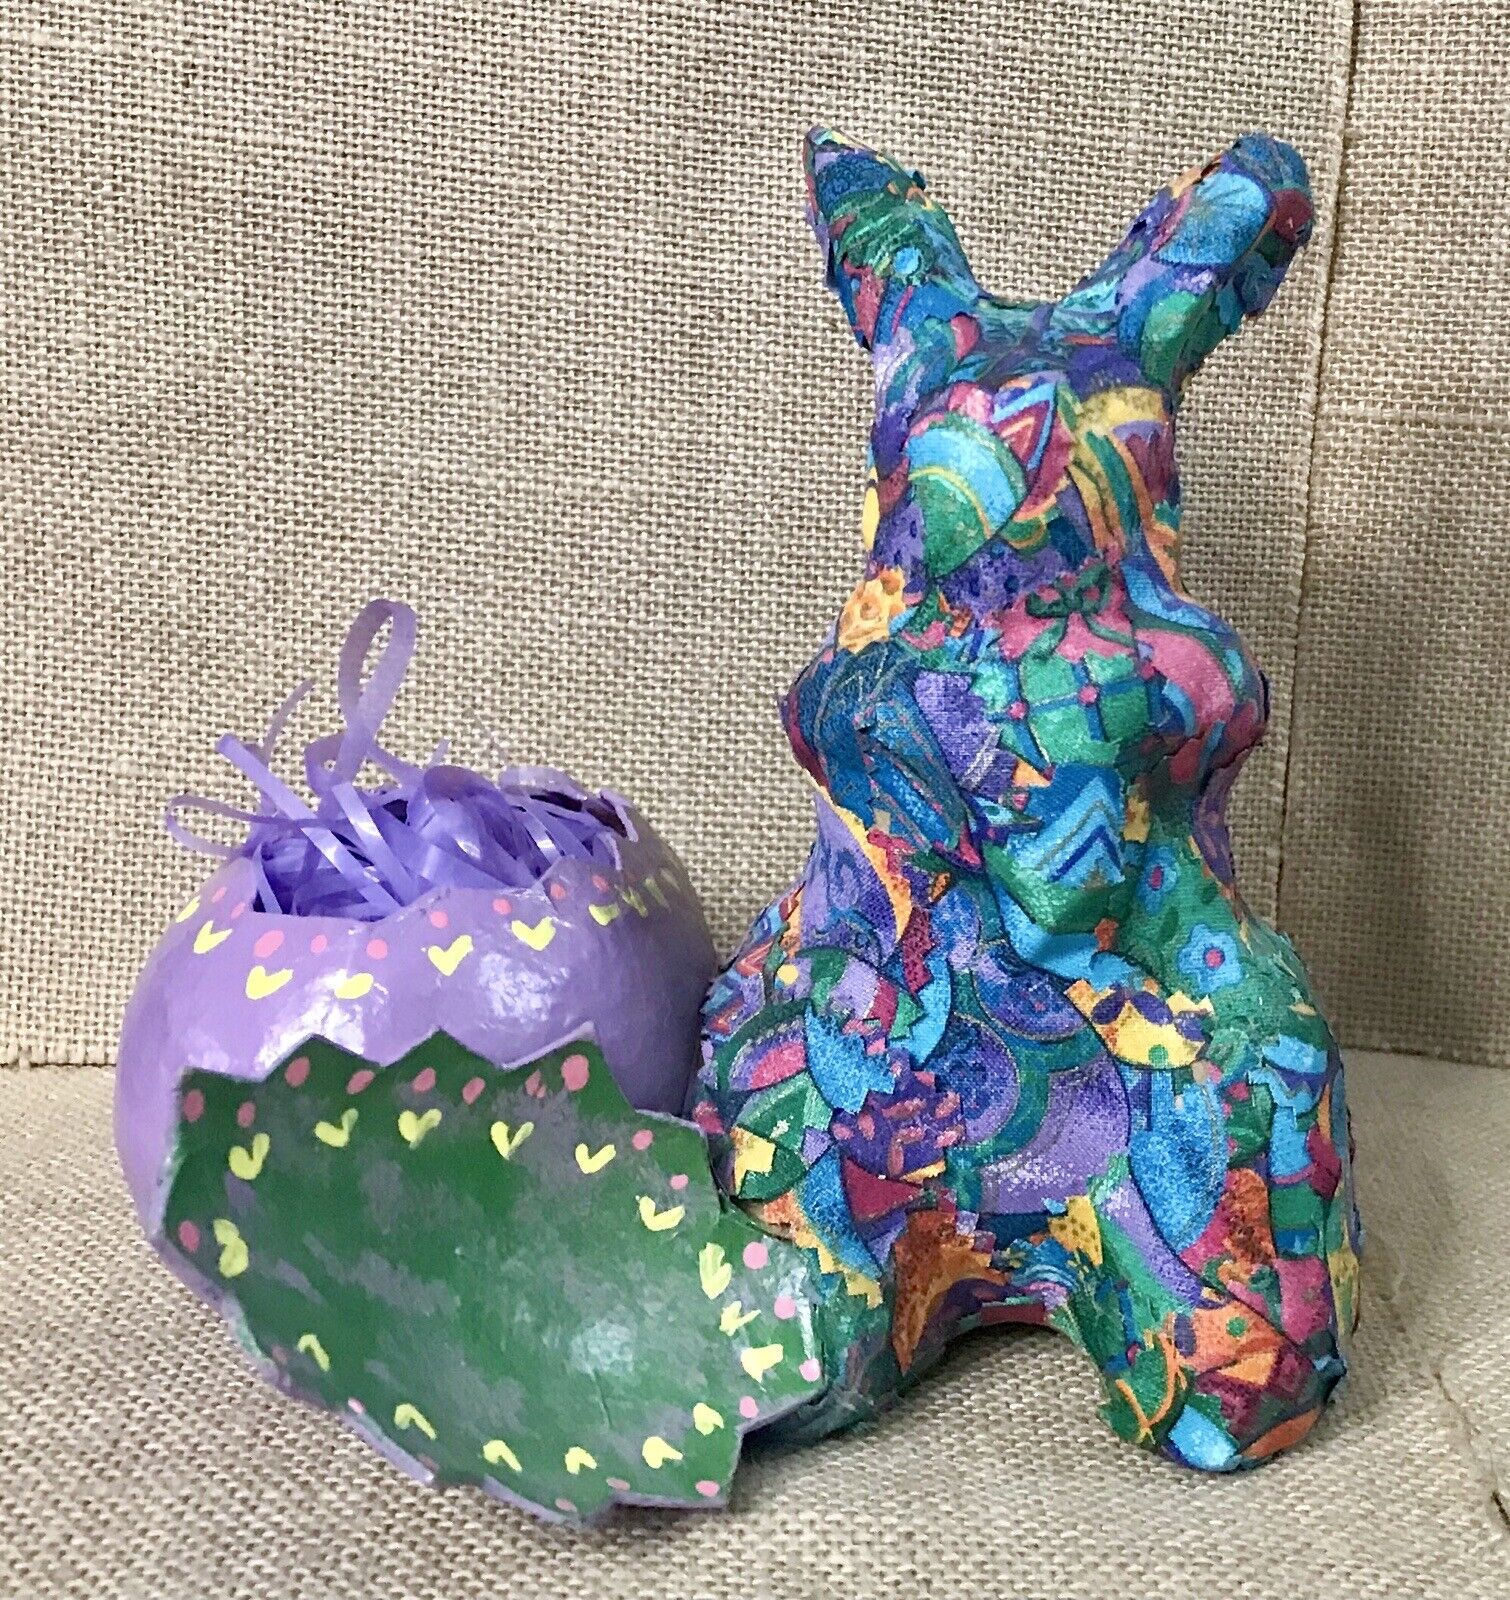 Handmade Fabric Decoupage Paper Mache Bunny w Cracked Egg Kitsch New Wave AS IS